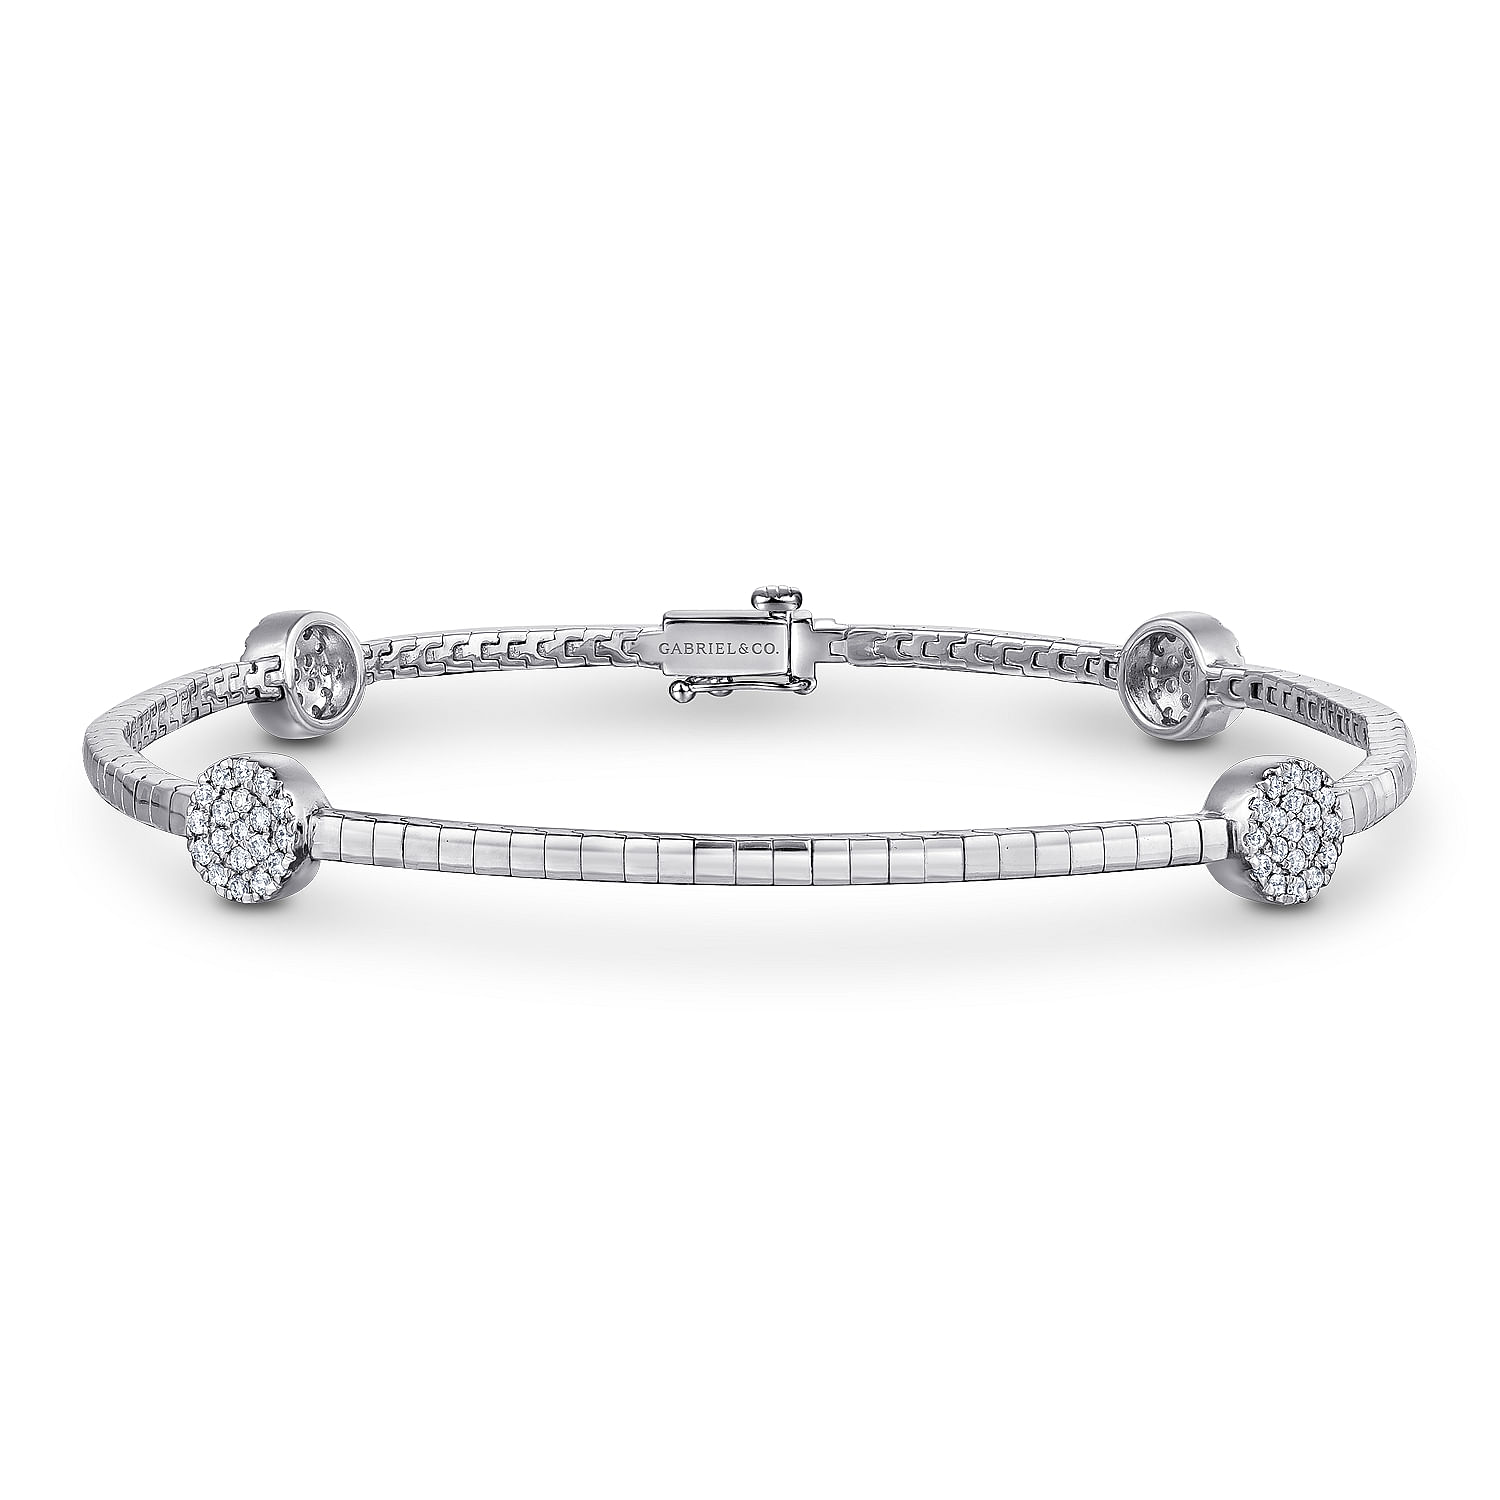 14K White Gold Tennis Bracelet with Round Cluster Diamond Stations